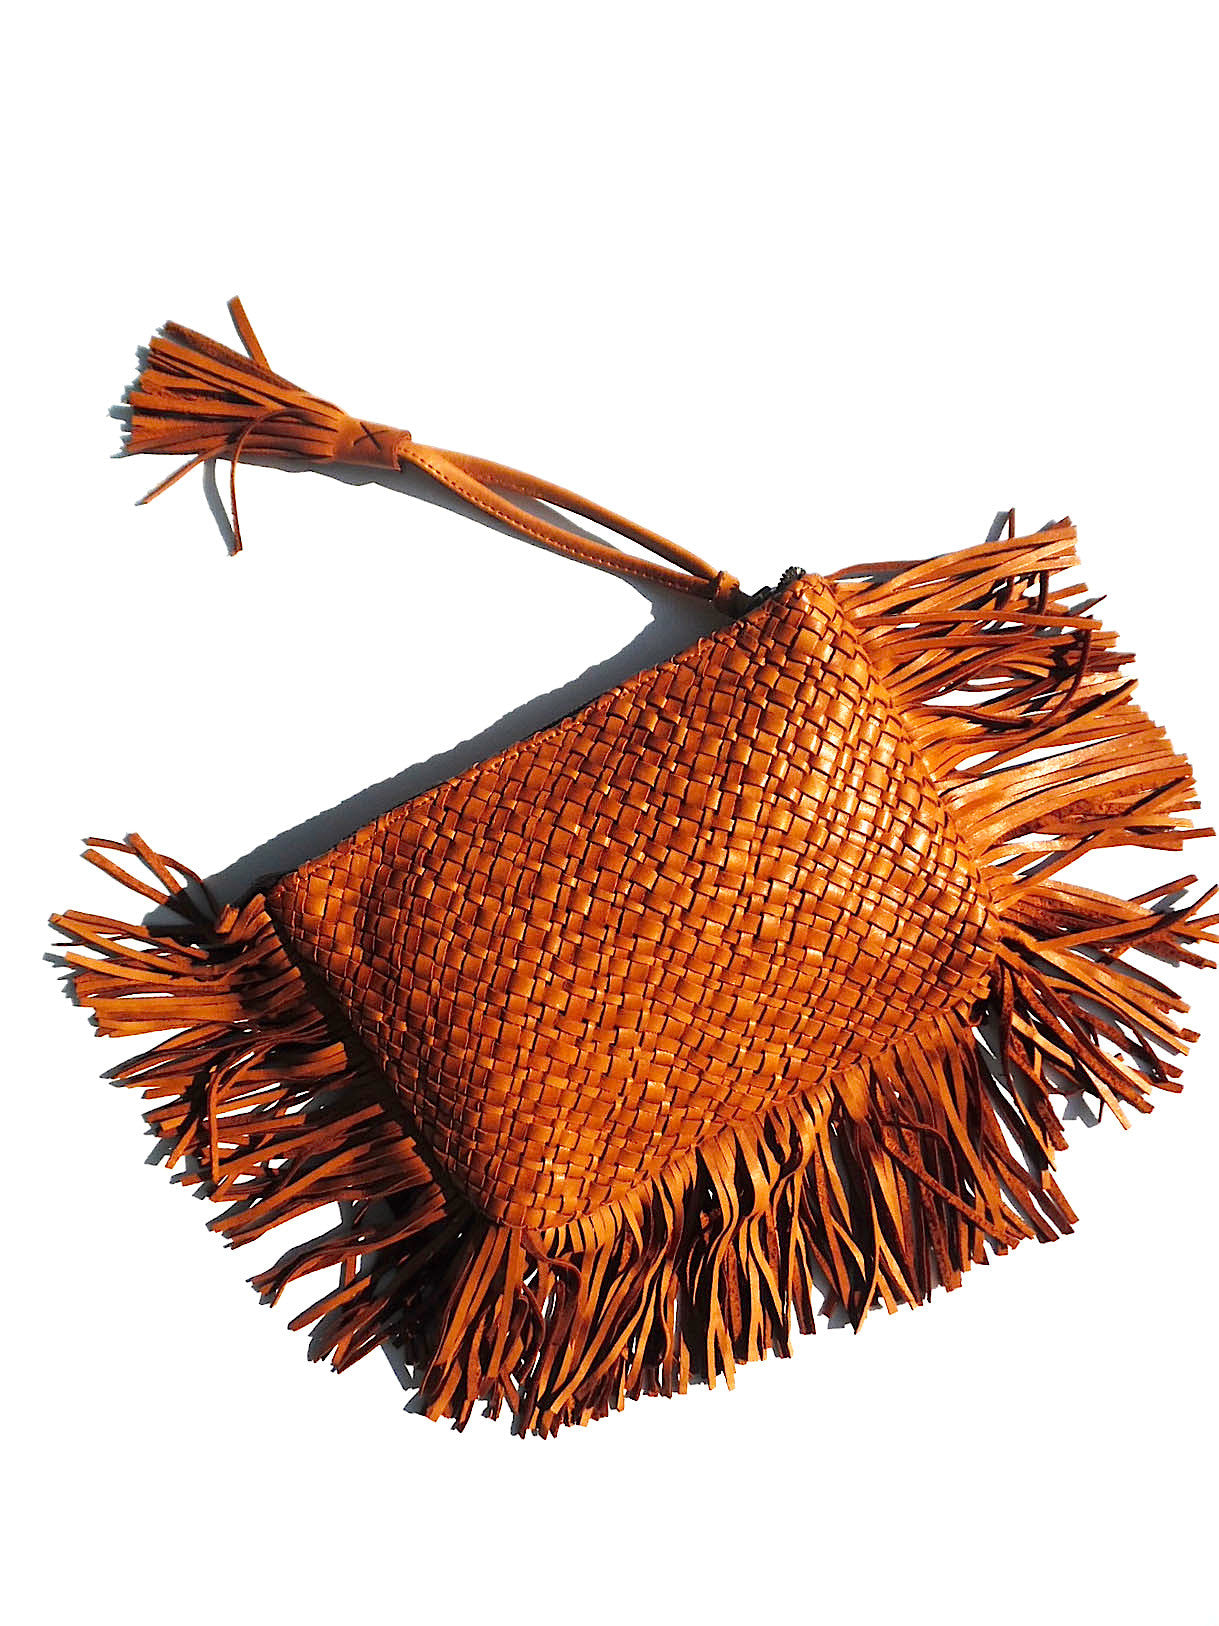 Hand Woven Leather Clutch With Fringe And Tassel